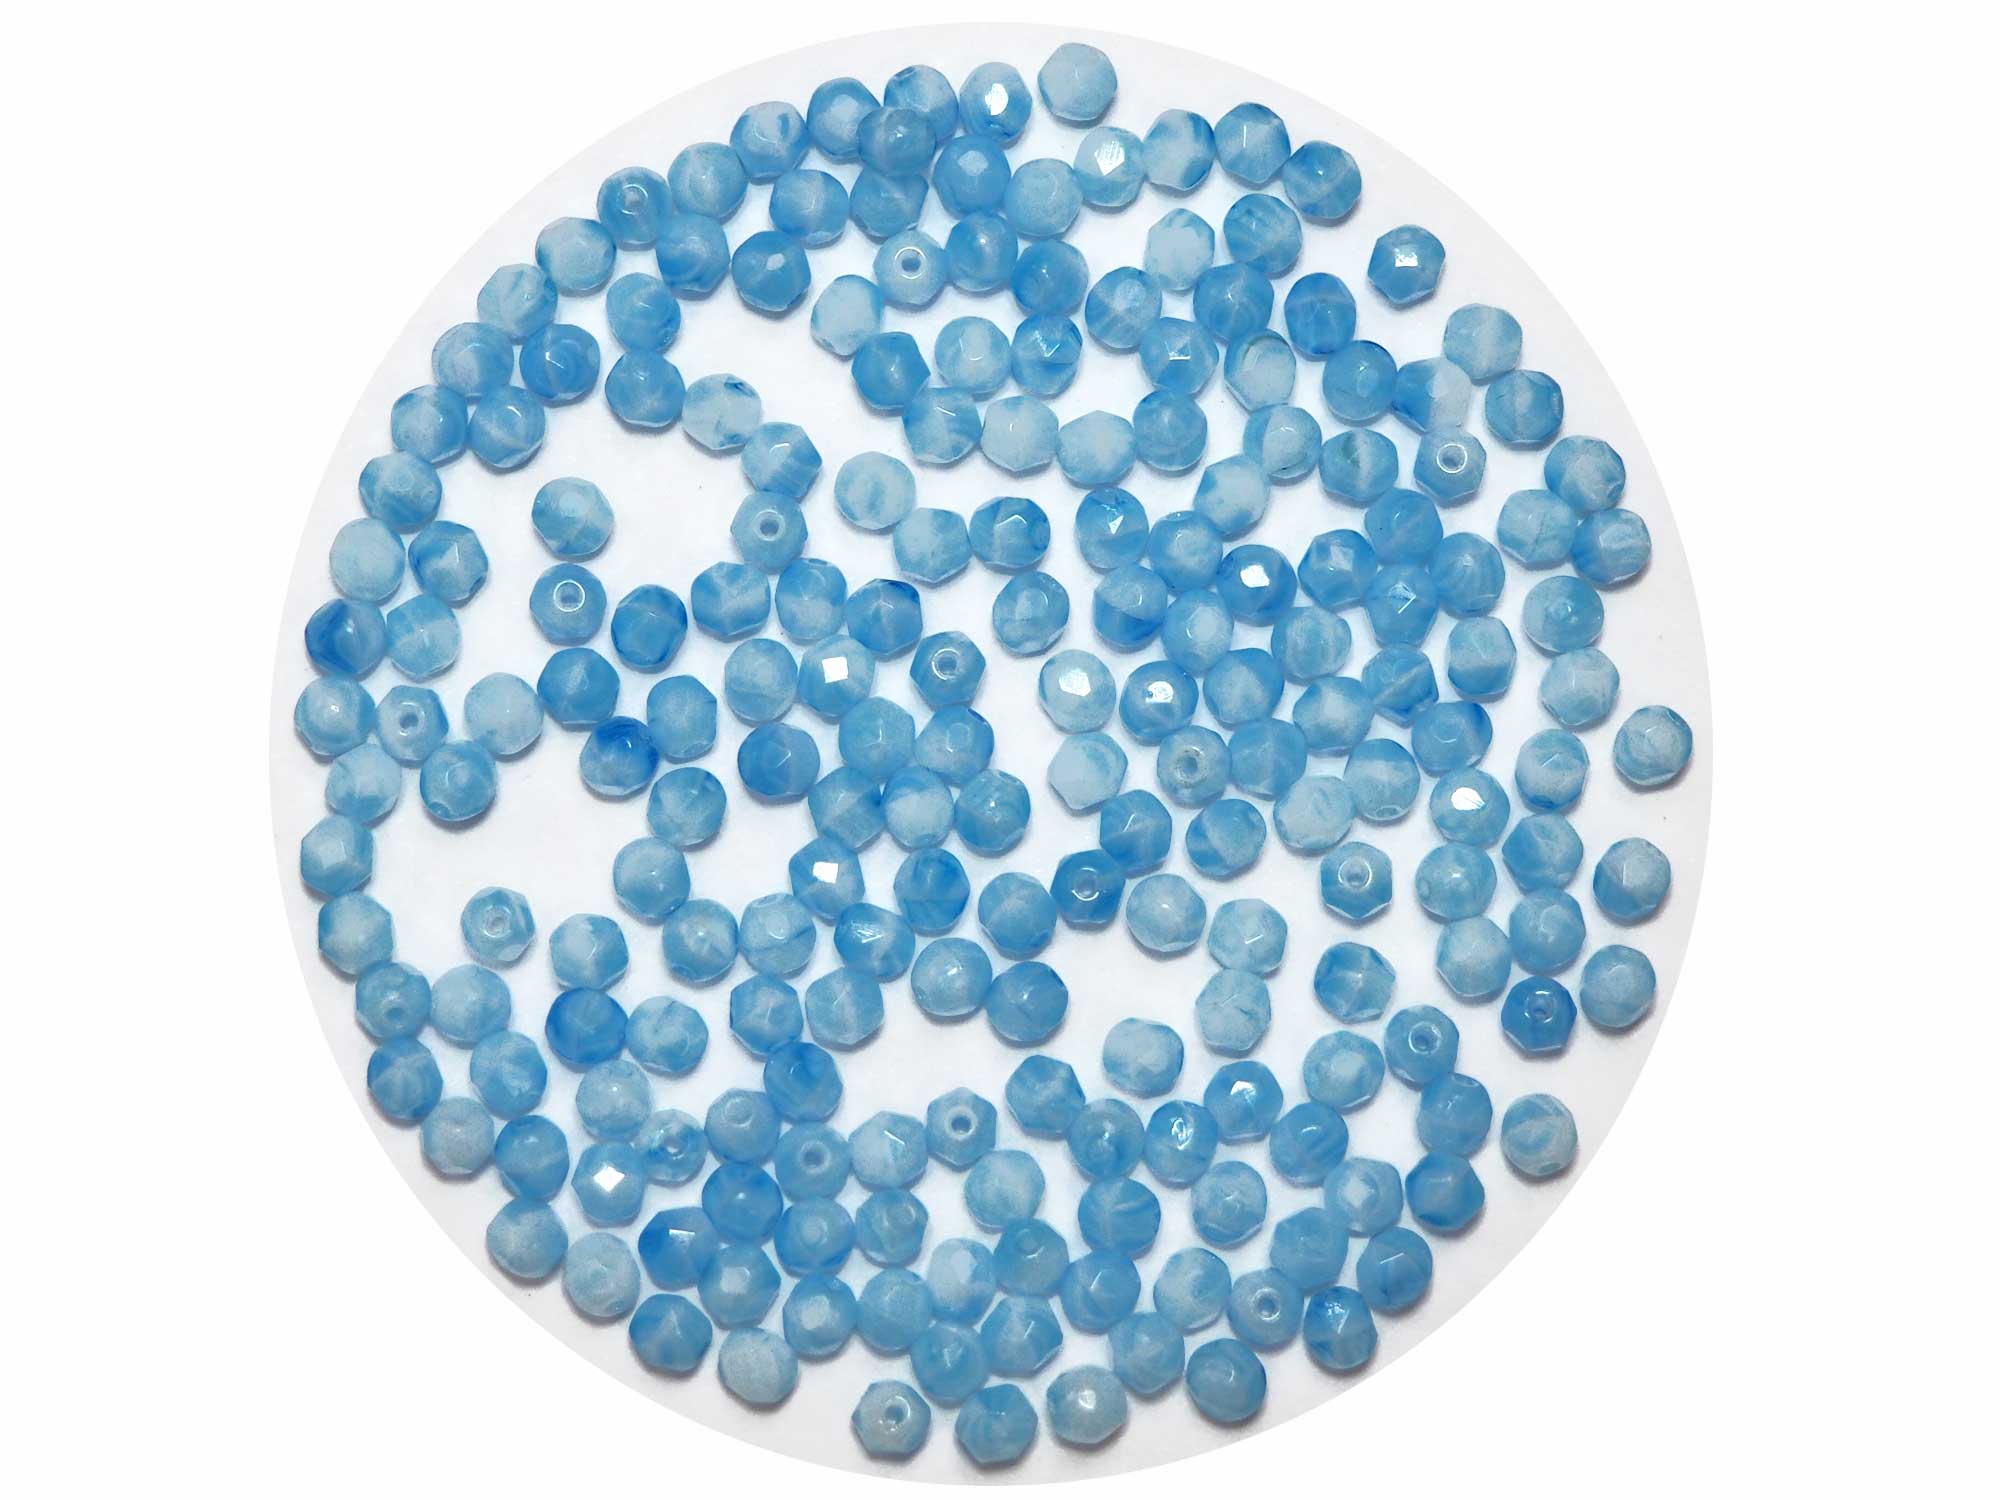 Light Blue Givre 2-tone, Czech Fire Polished Round Faceted Glass Beads, 4mm 100pcs, P460